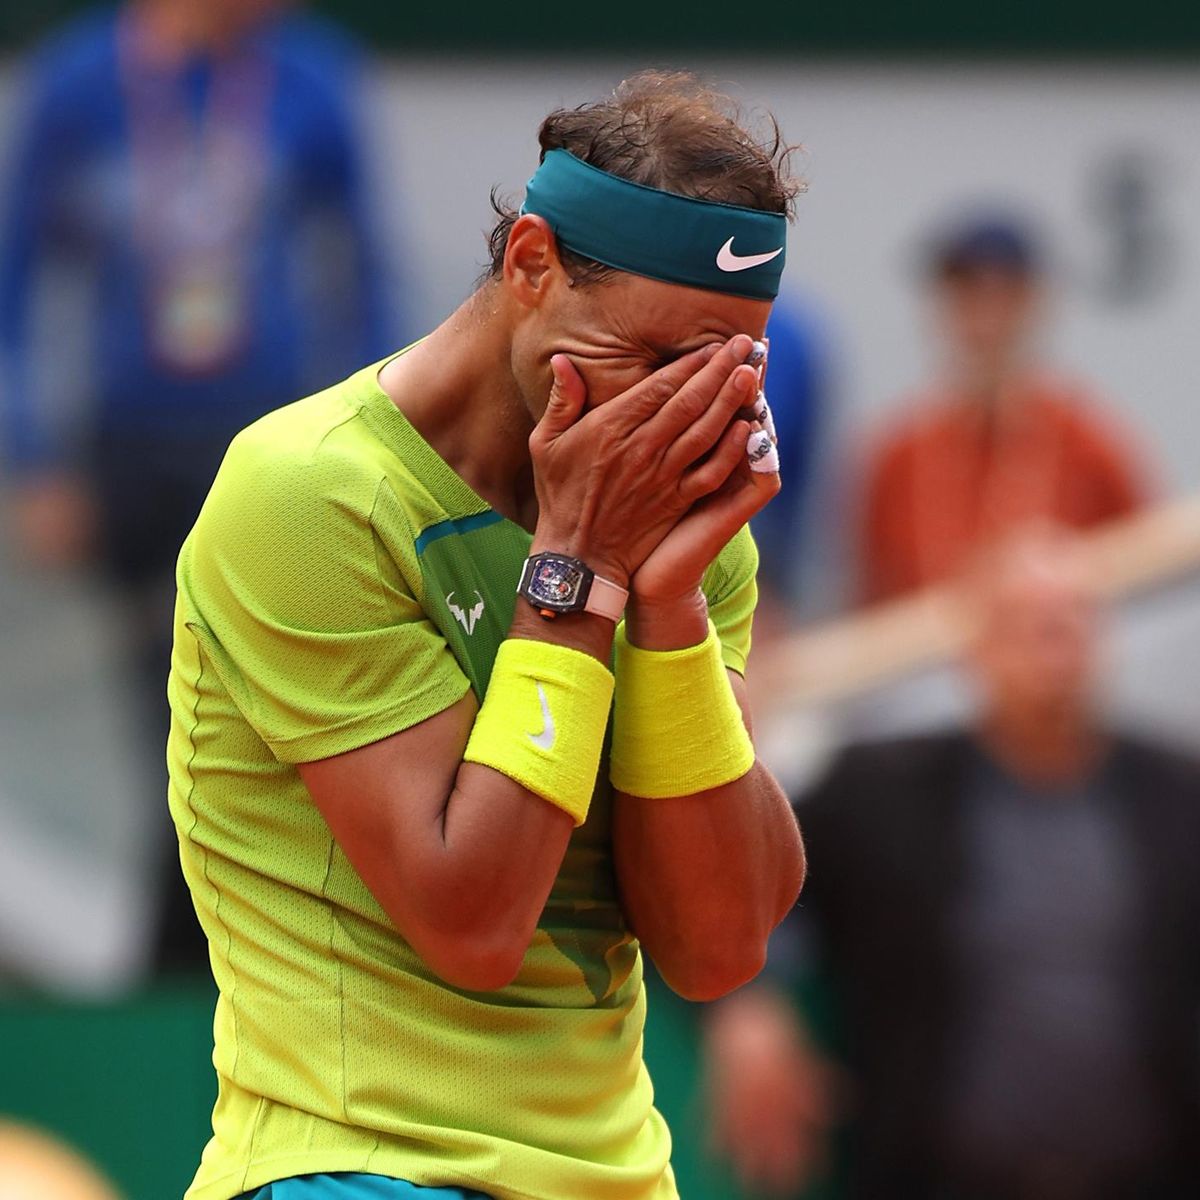 The legend continues to grow! - Watch Rafael Nadal win 14th French Open title with victory over Casper Ruud - Tennis video